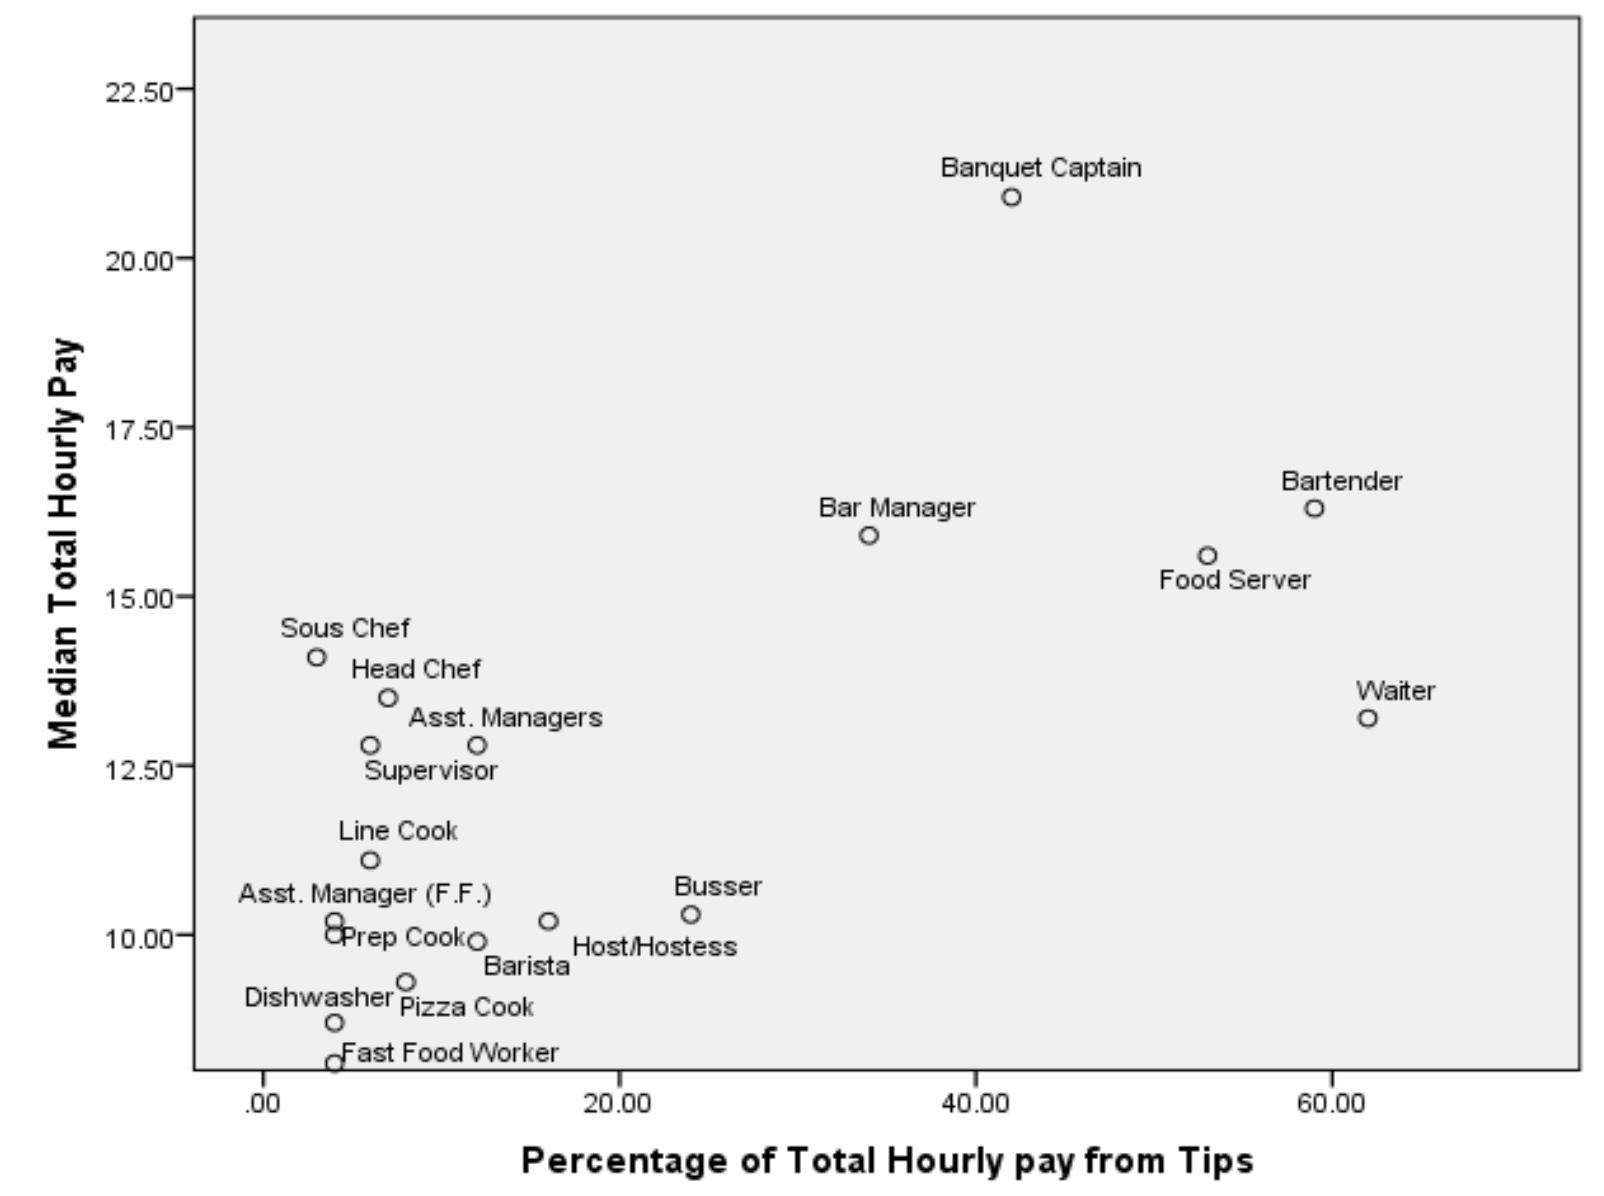 Chart of median total hourly pay vs percentage of median wages earned from tips. Data prepared by Michael Lynn and sourced from payscale.com.